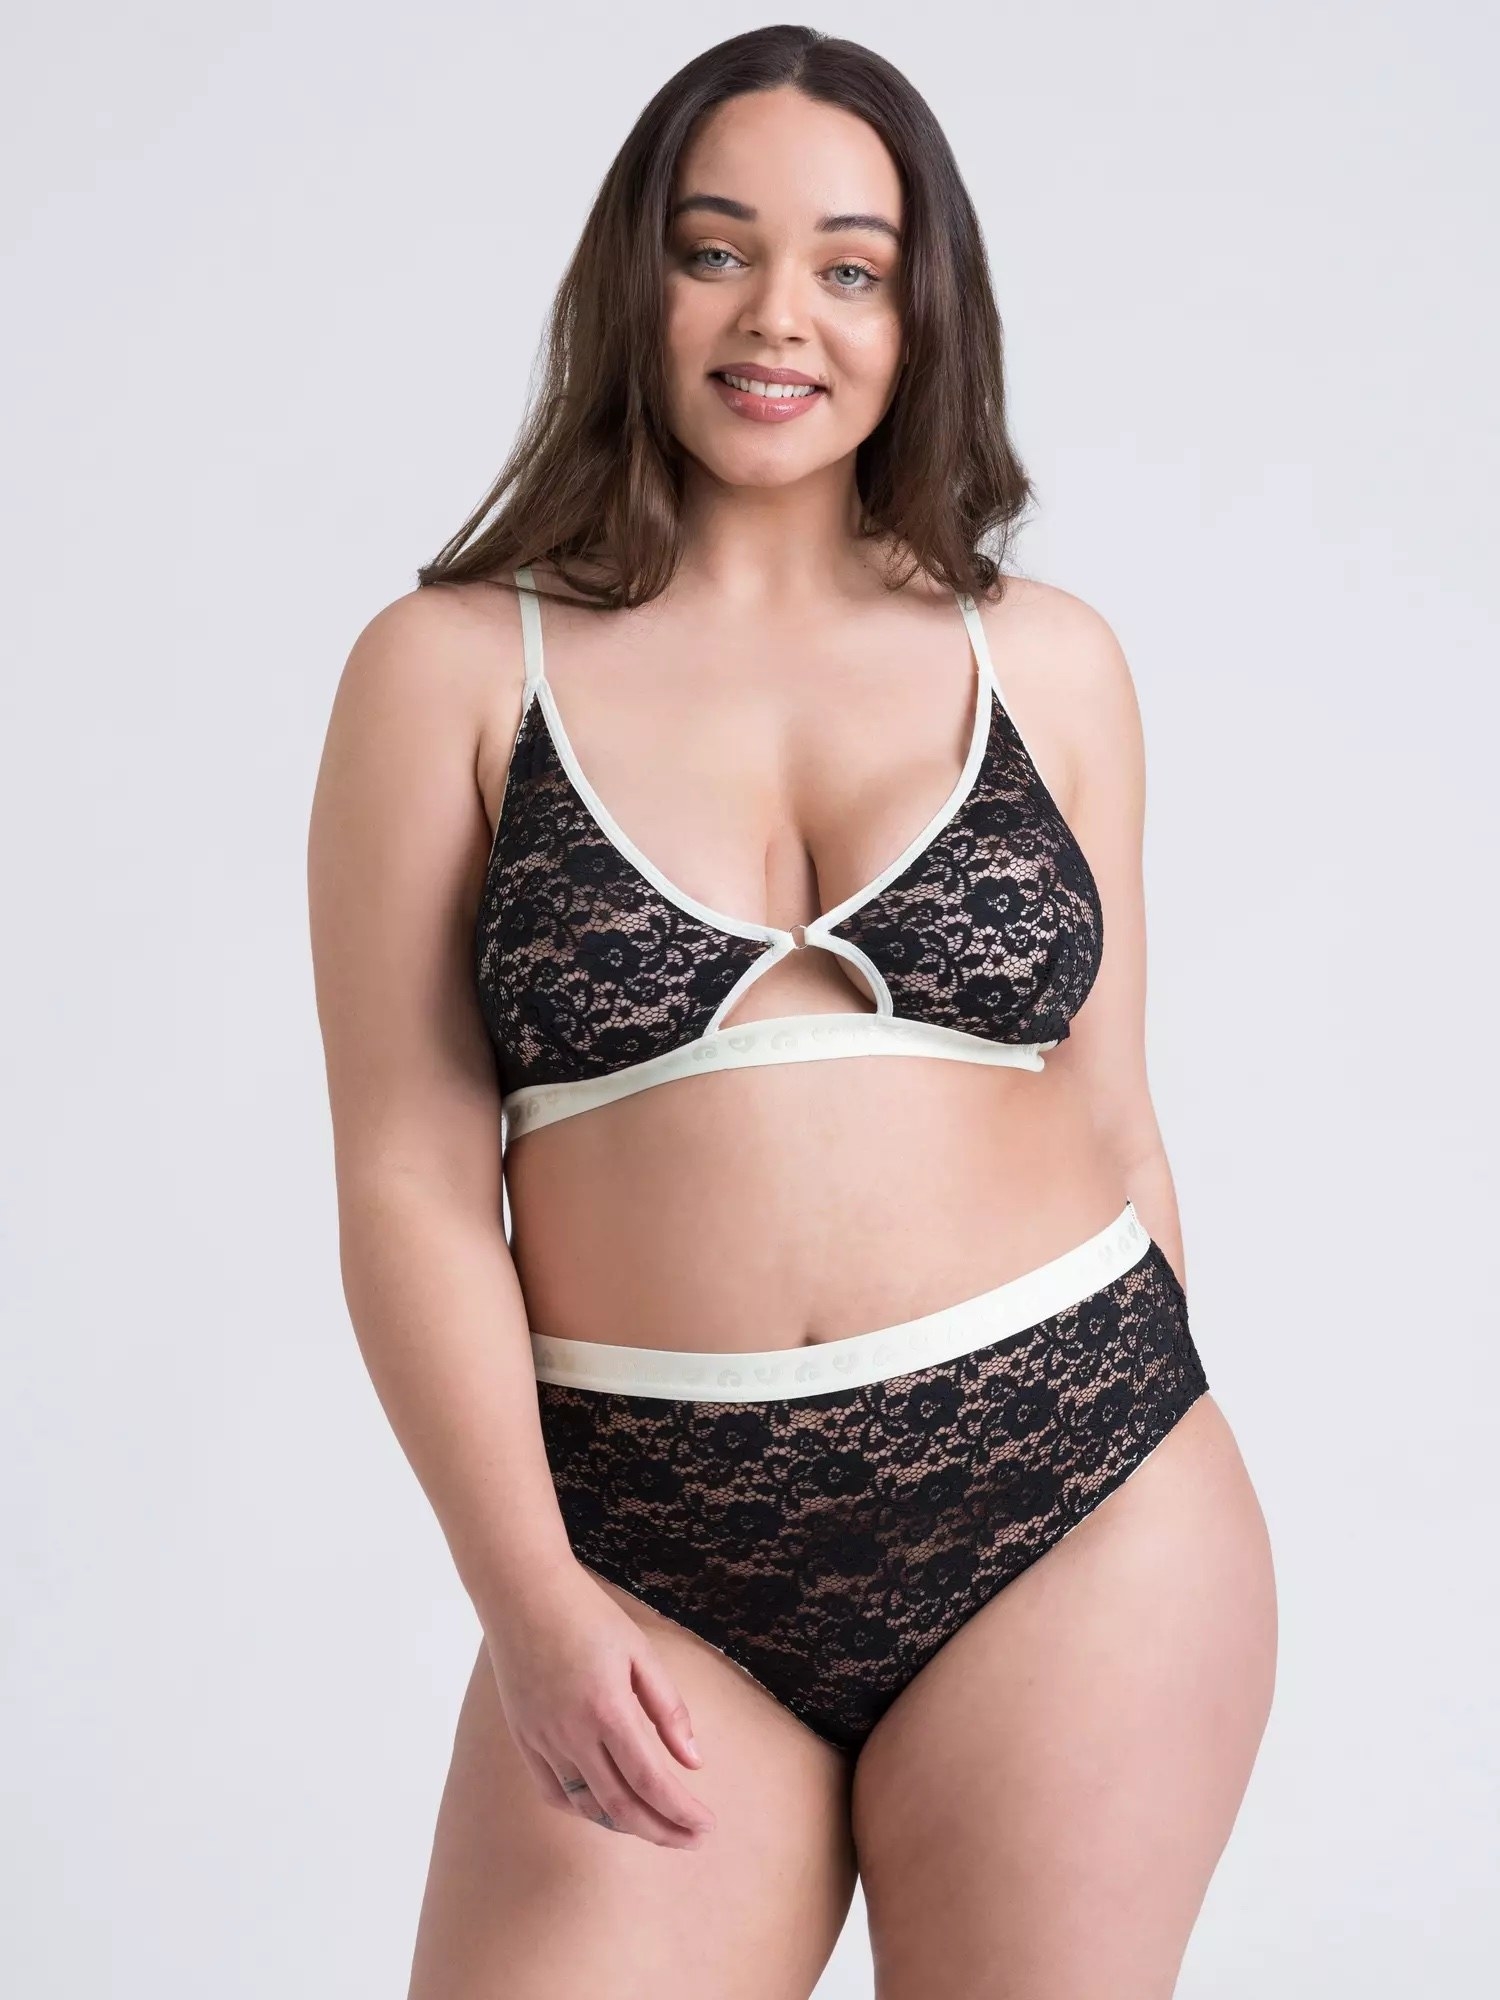 Model is wearing a black lace bra and underwear set with white borders around the hem